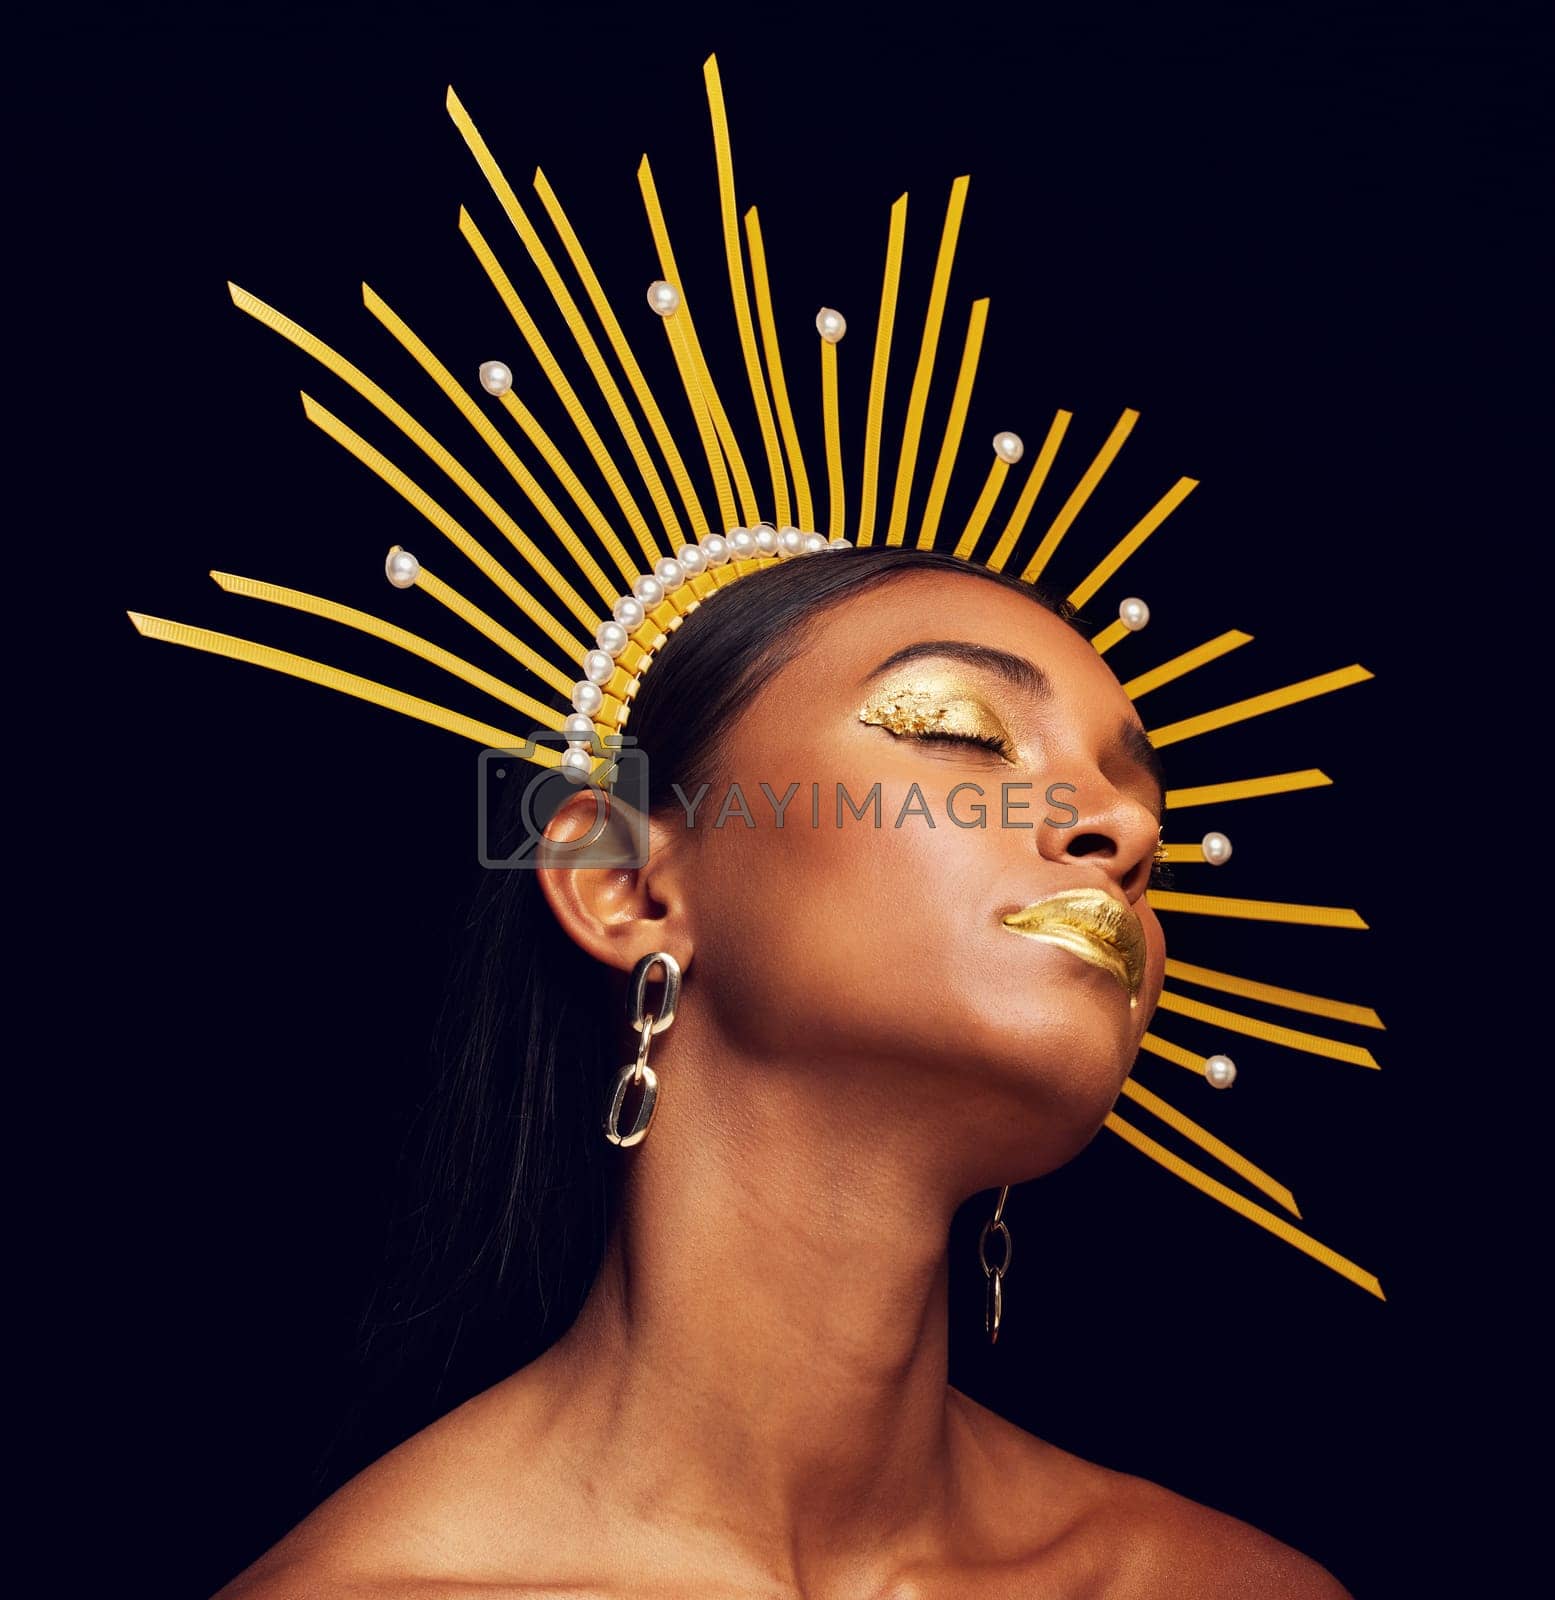 Royalty free image of Crown, gold makeup and a beauty queen isolated on a black background in a studio. Dreaming. ethereal and an Indian girl with cosmetics, accessories and jewelry for royalty on a dark backdrop by YuriArcurs